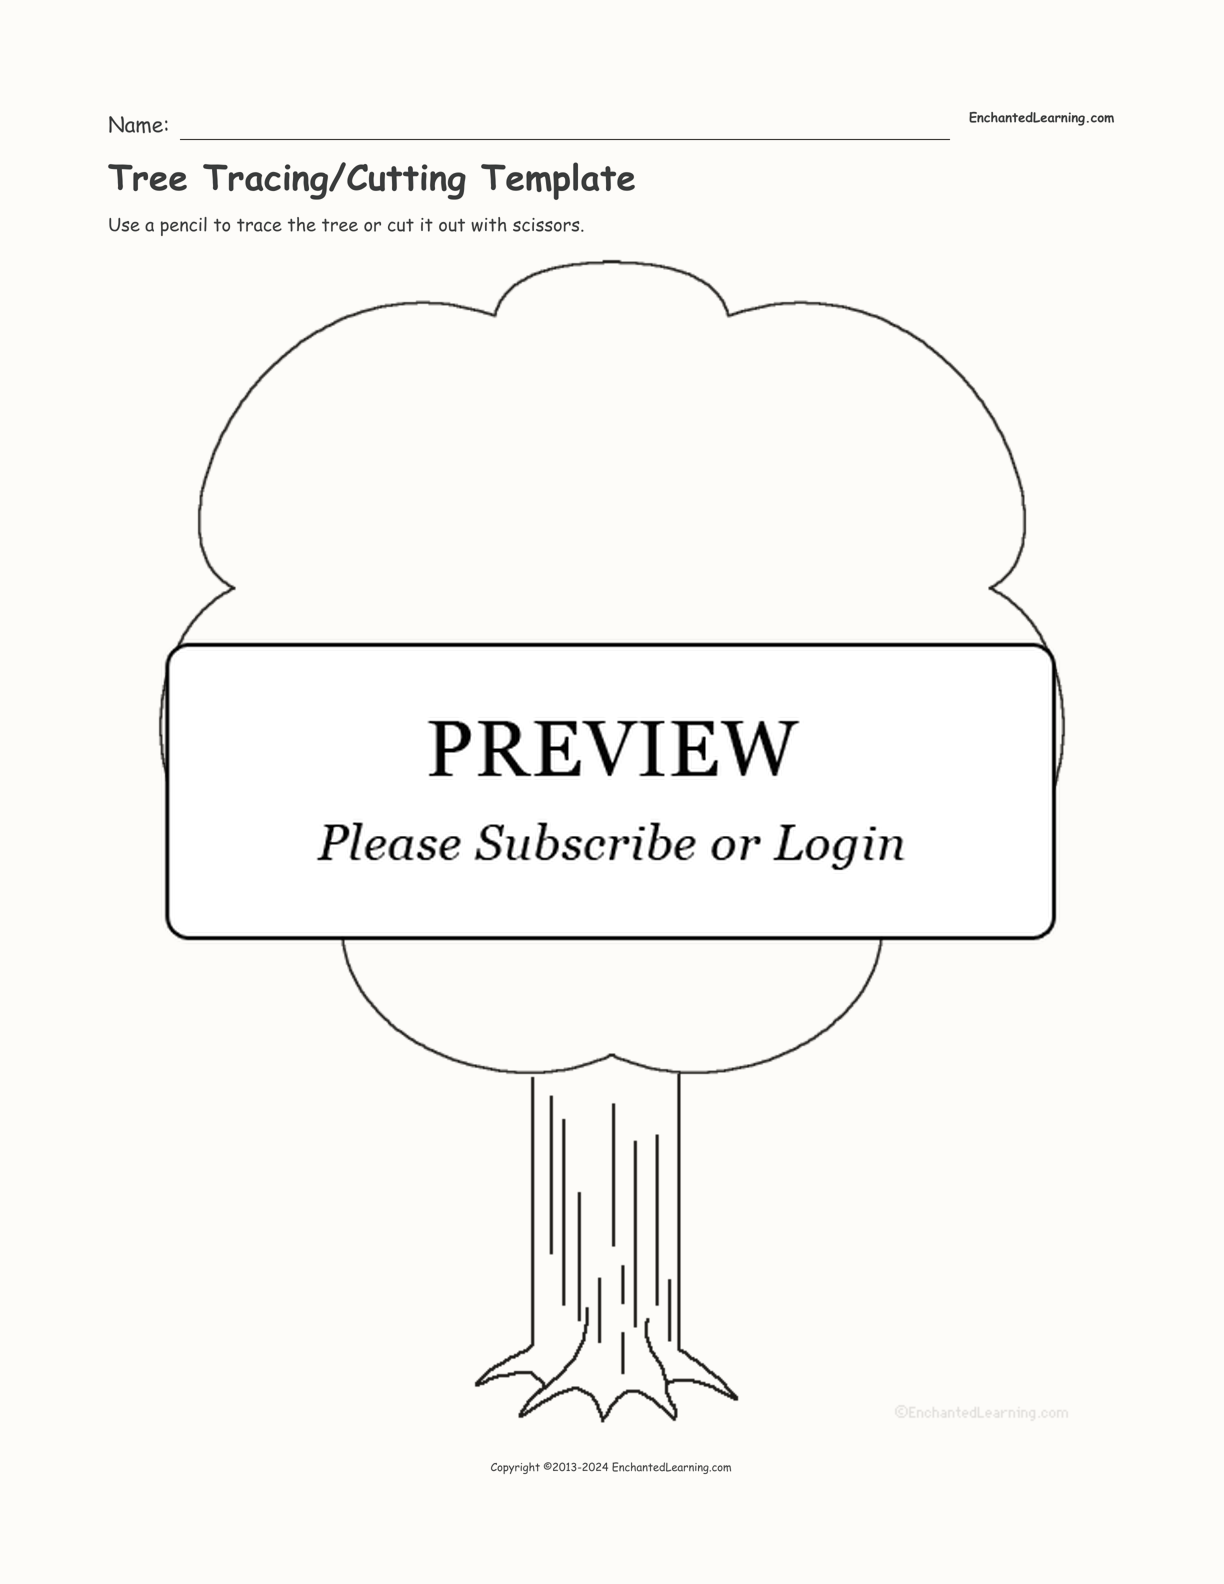 Tree Tracing/Cutting Template interactive printout page 1